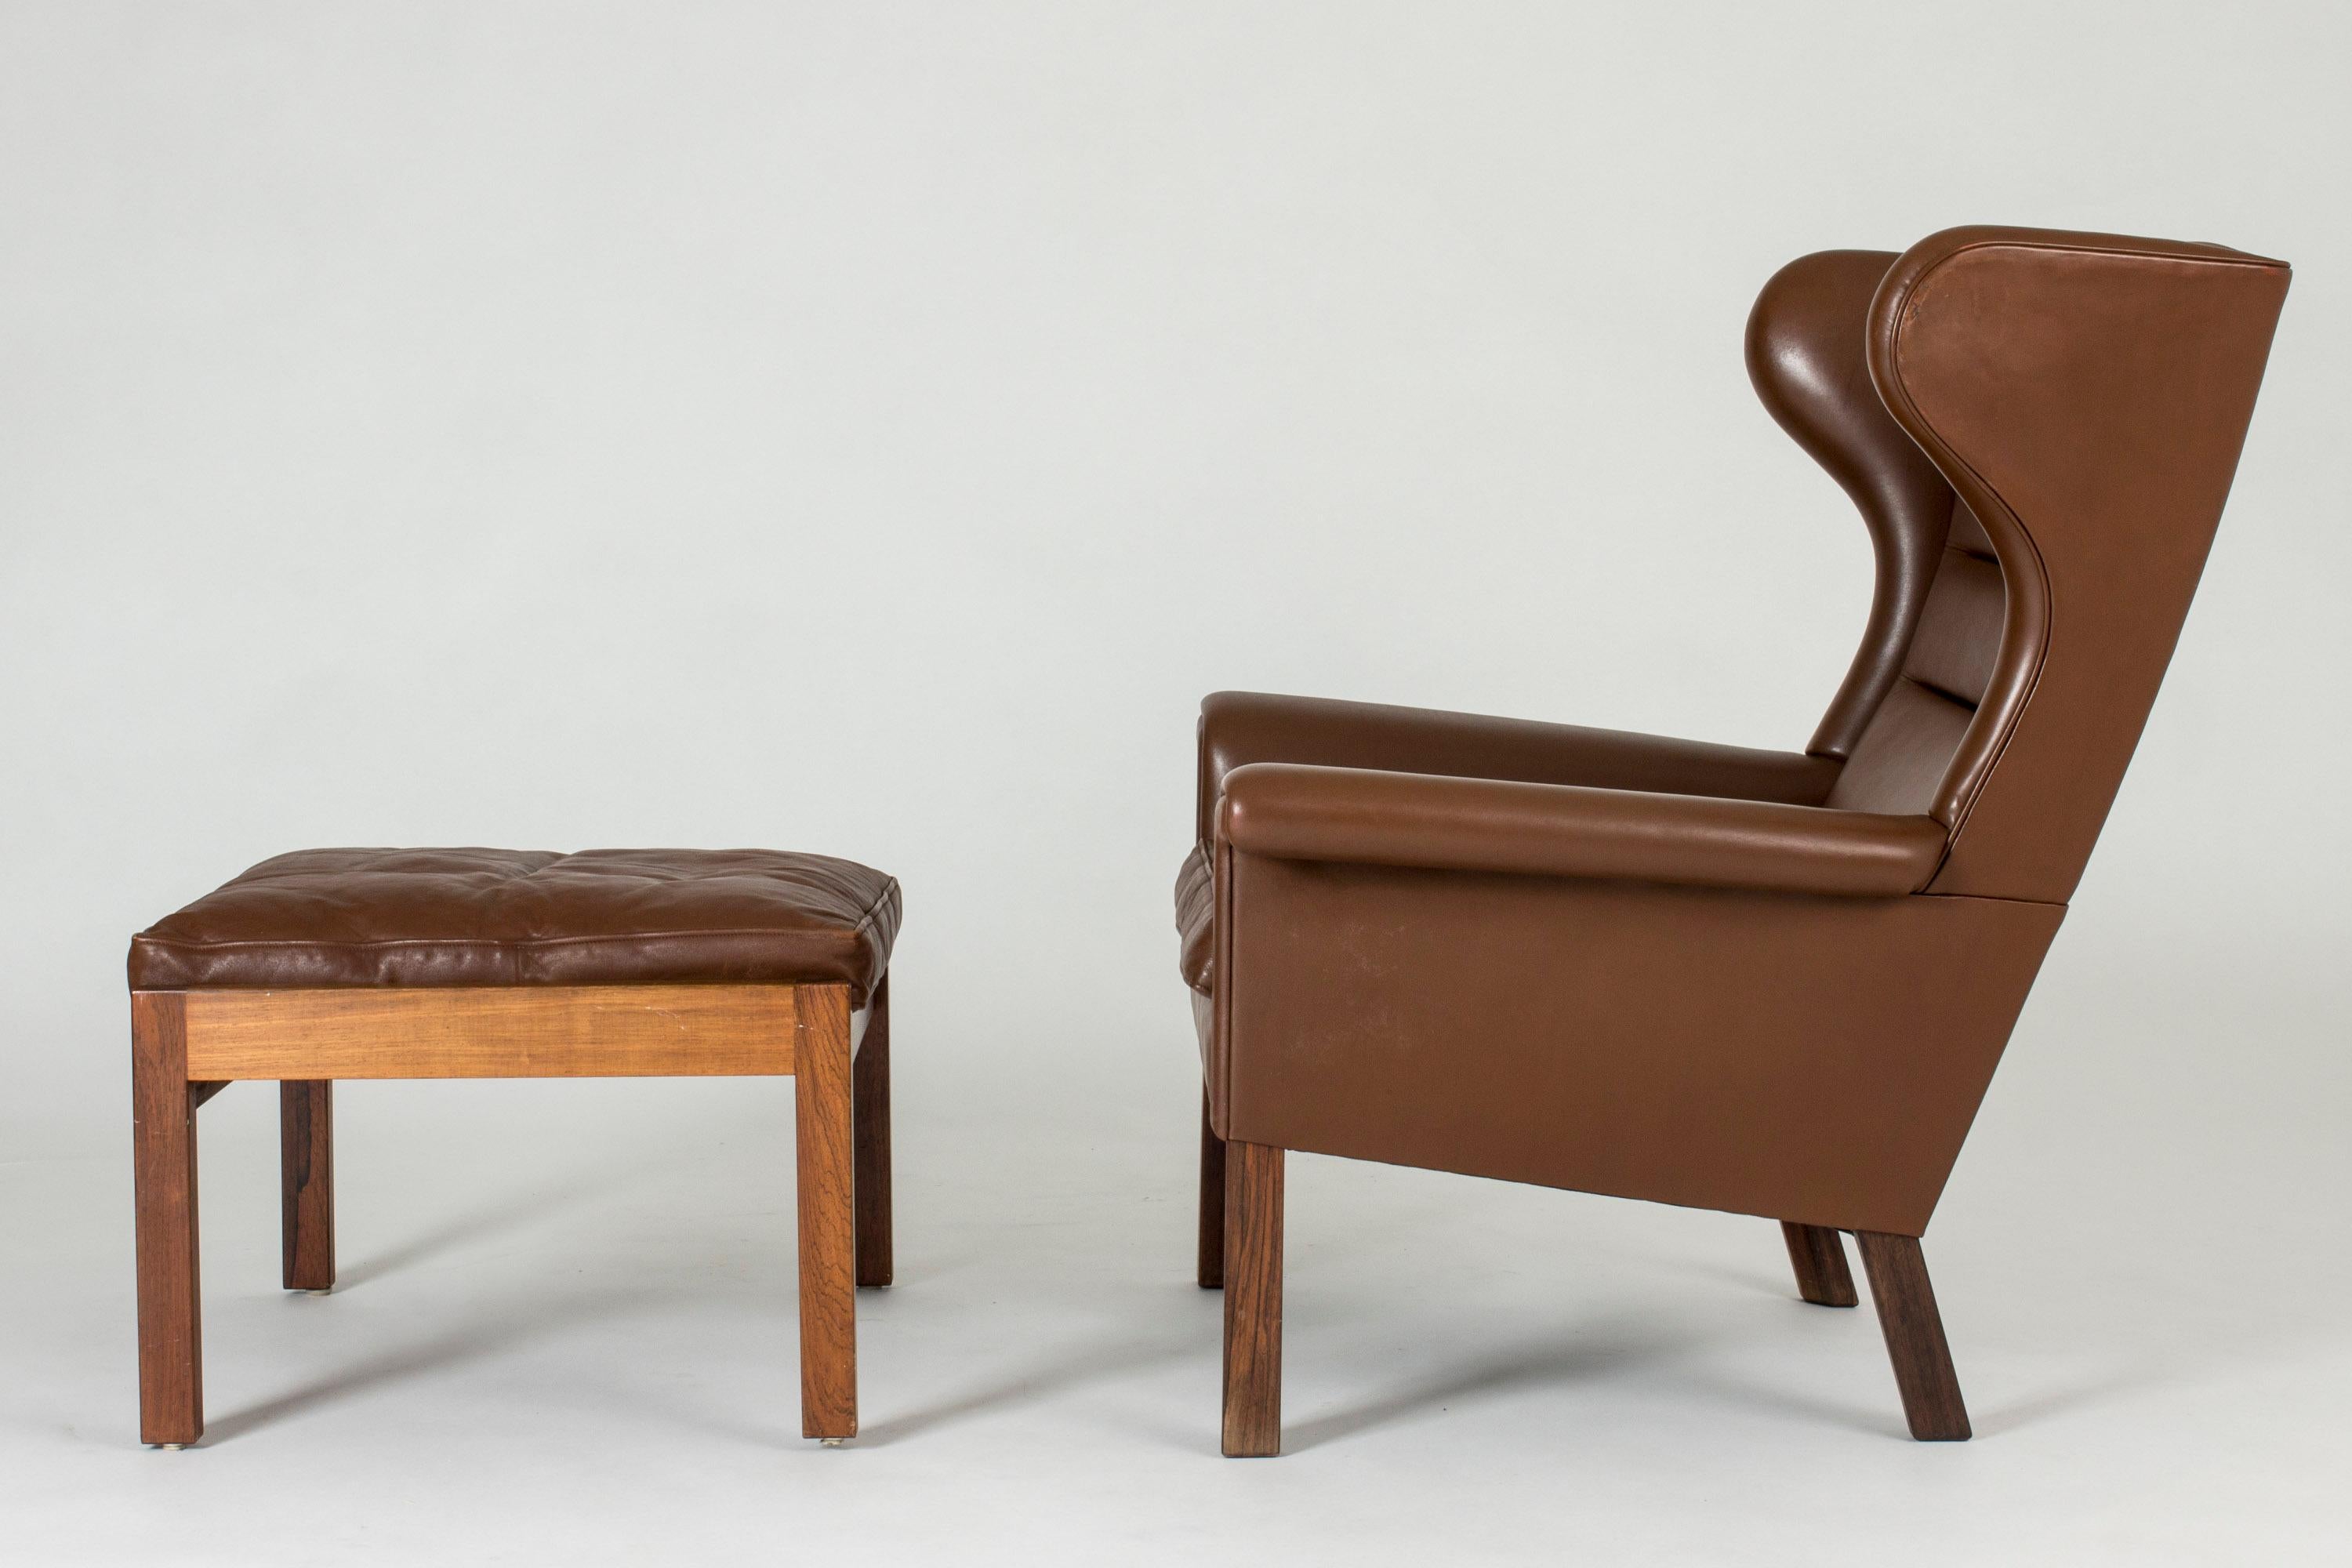 Mid-20th Century Pair of Leather Lounge Chairs by Hans J. Wegner for AP Stolen